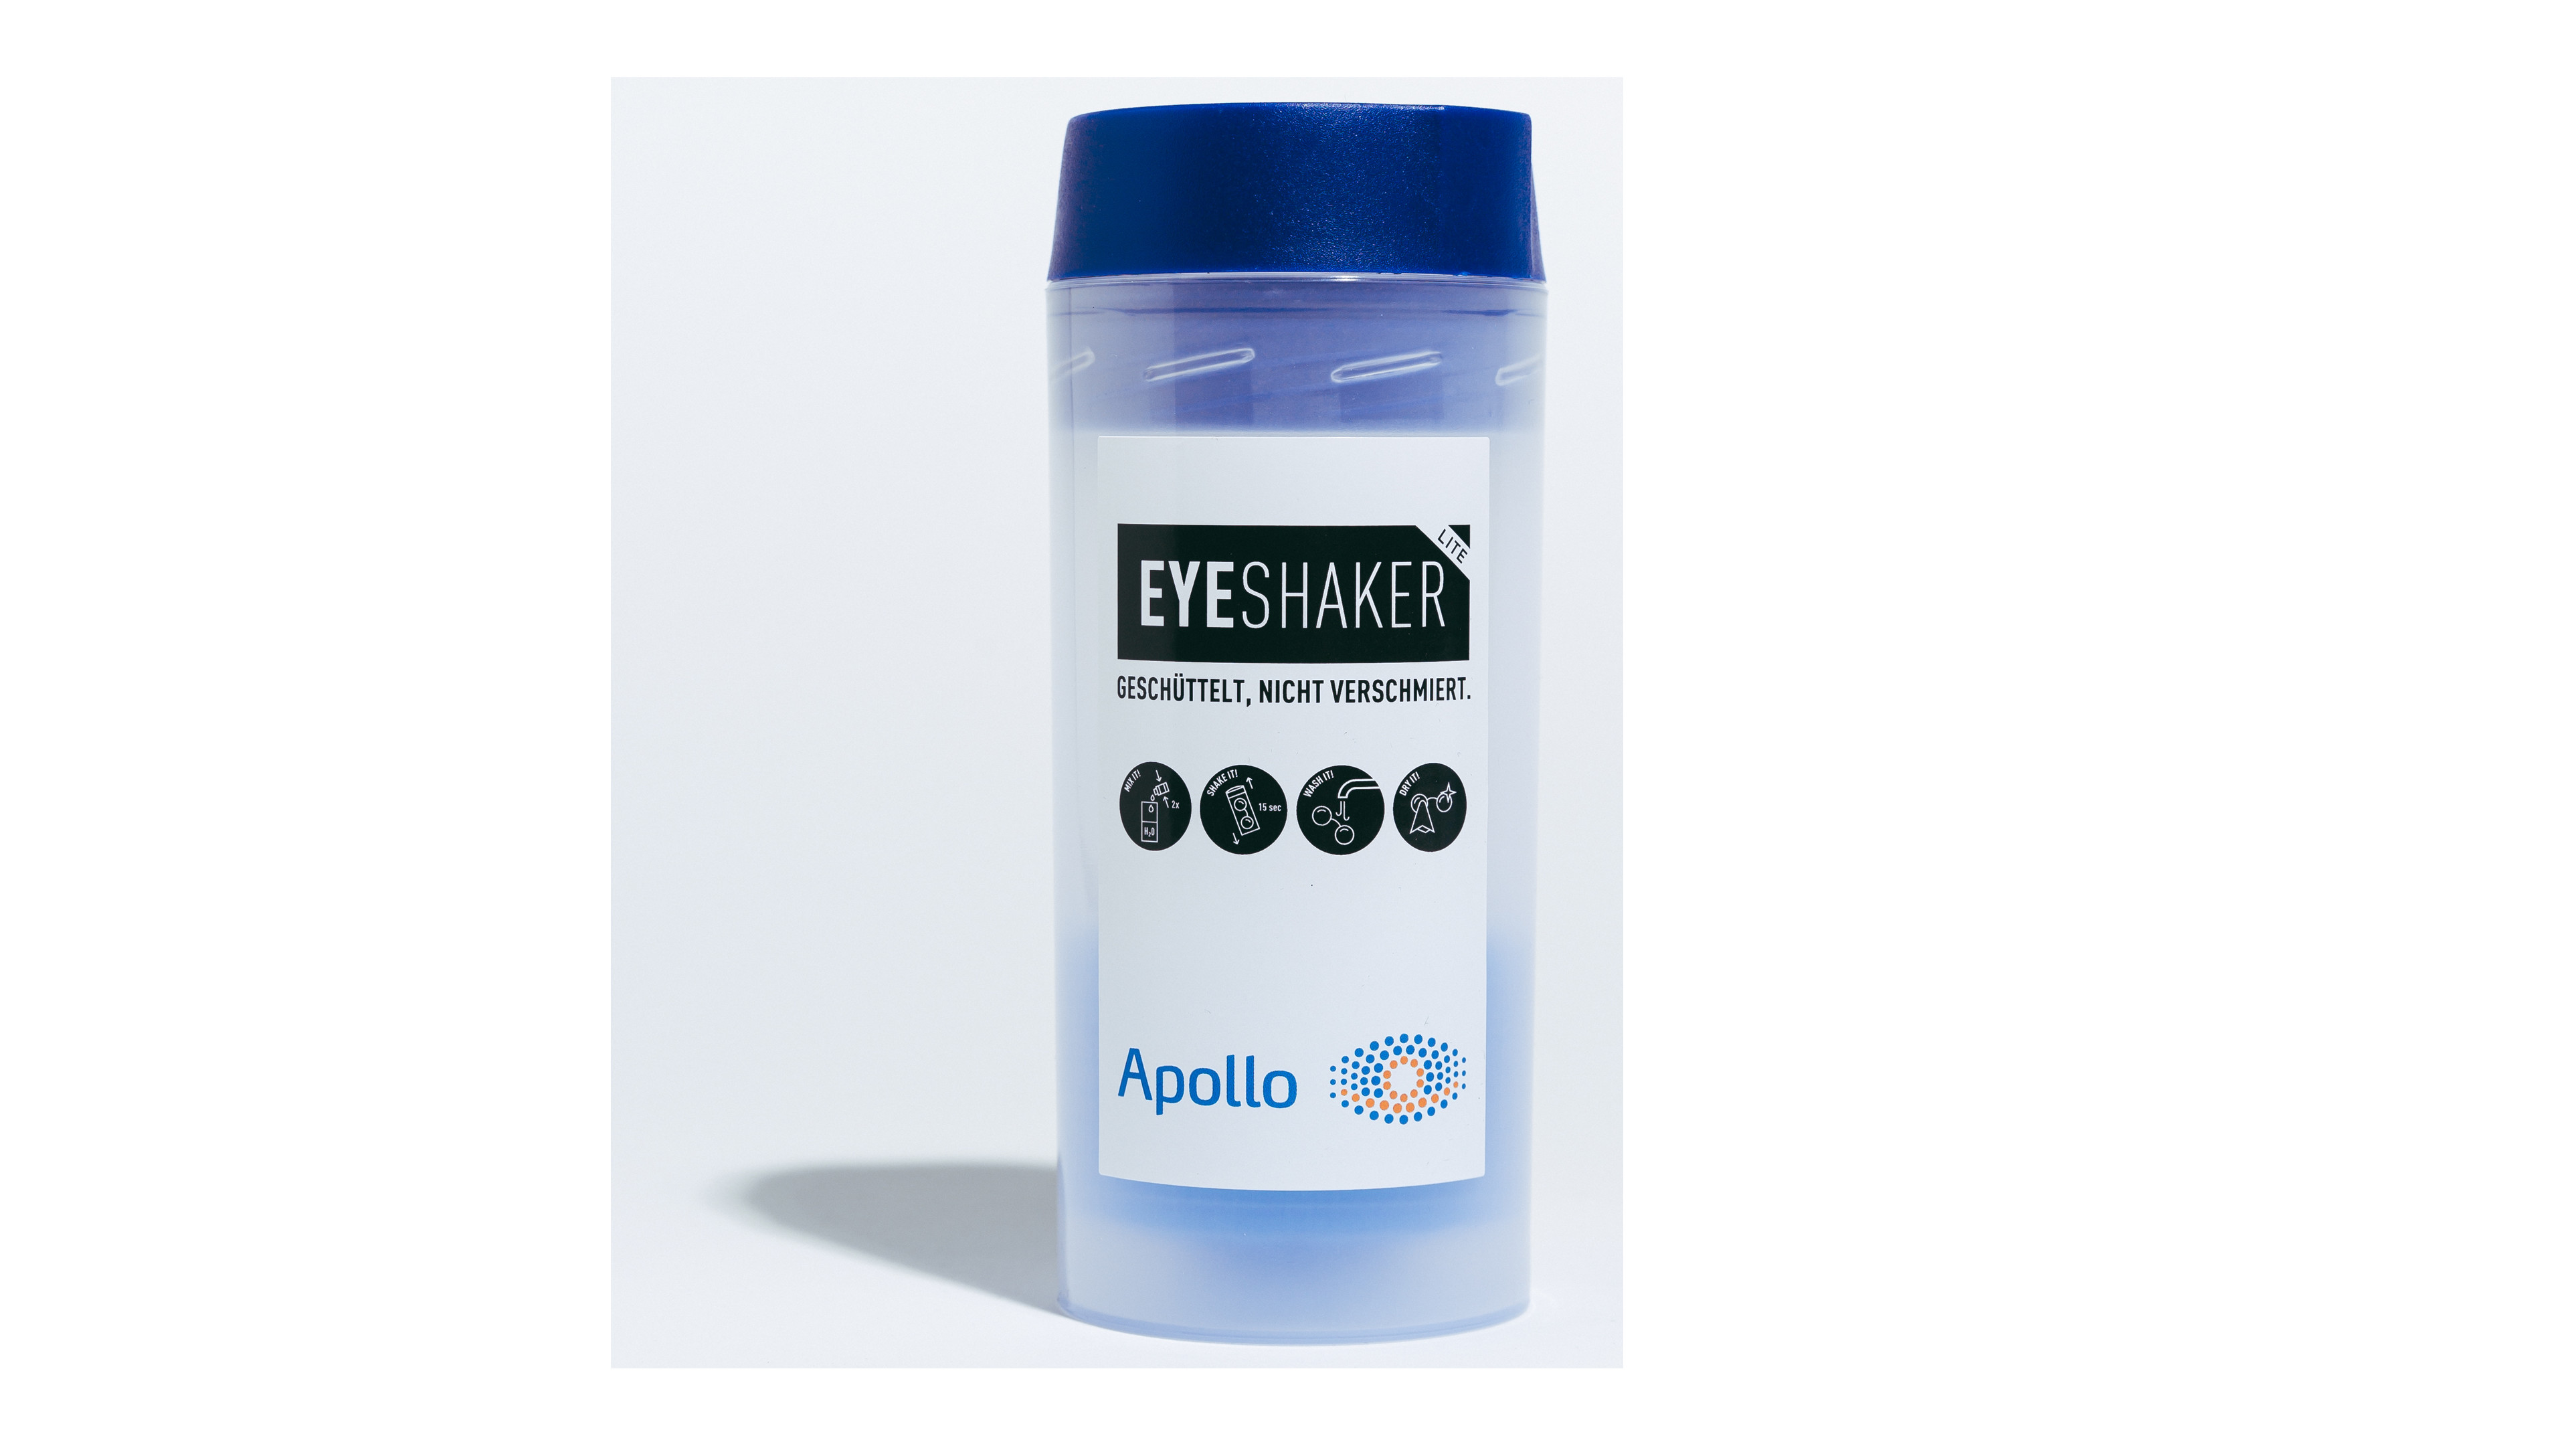 [products.image.front] Apollo Eyeshaker AO Accessoire